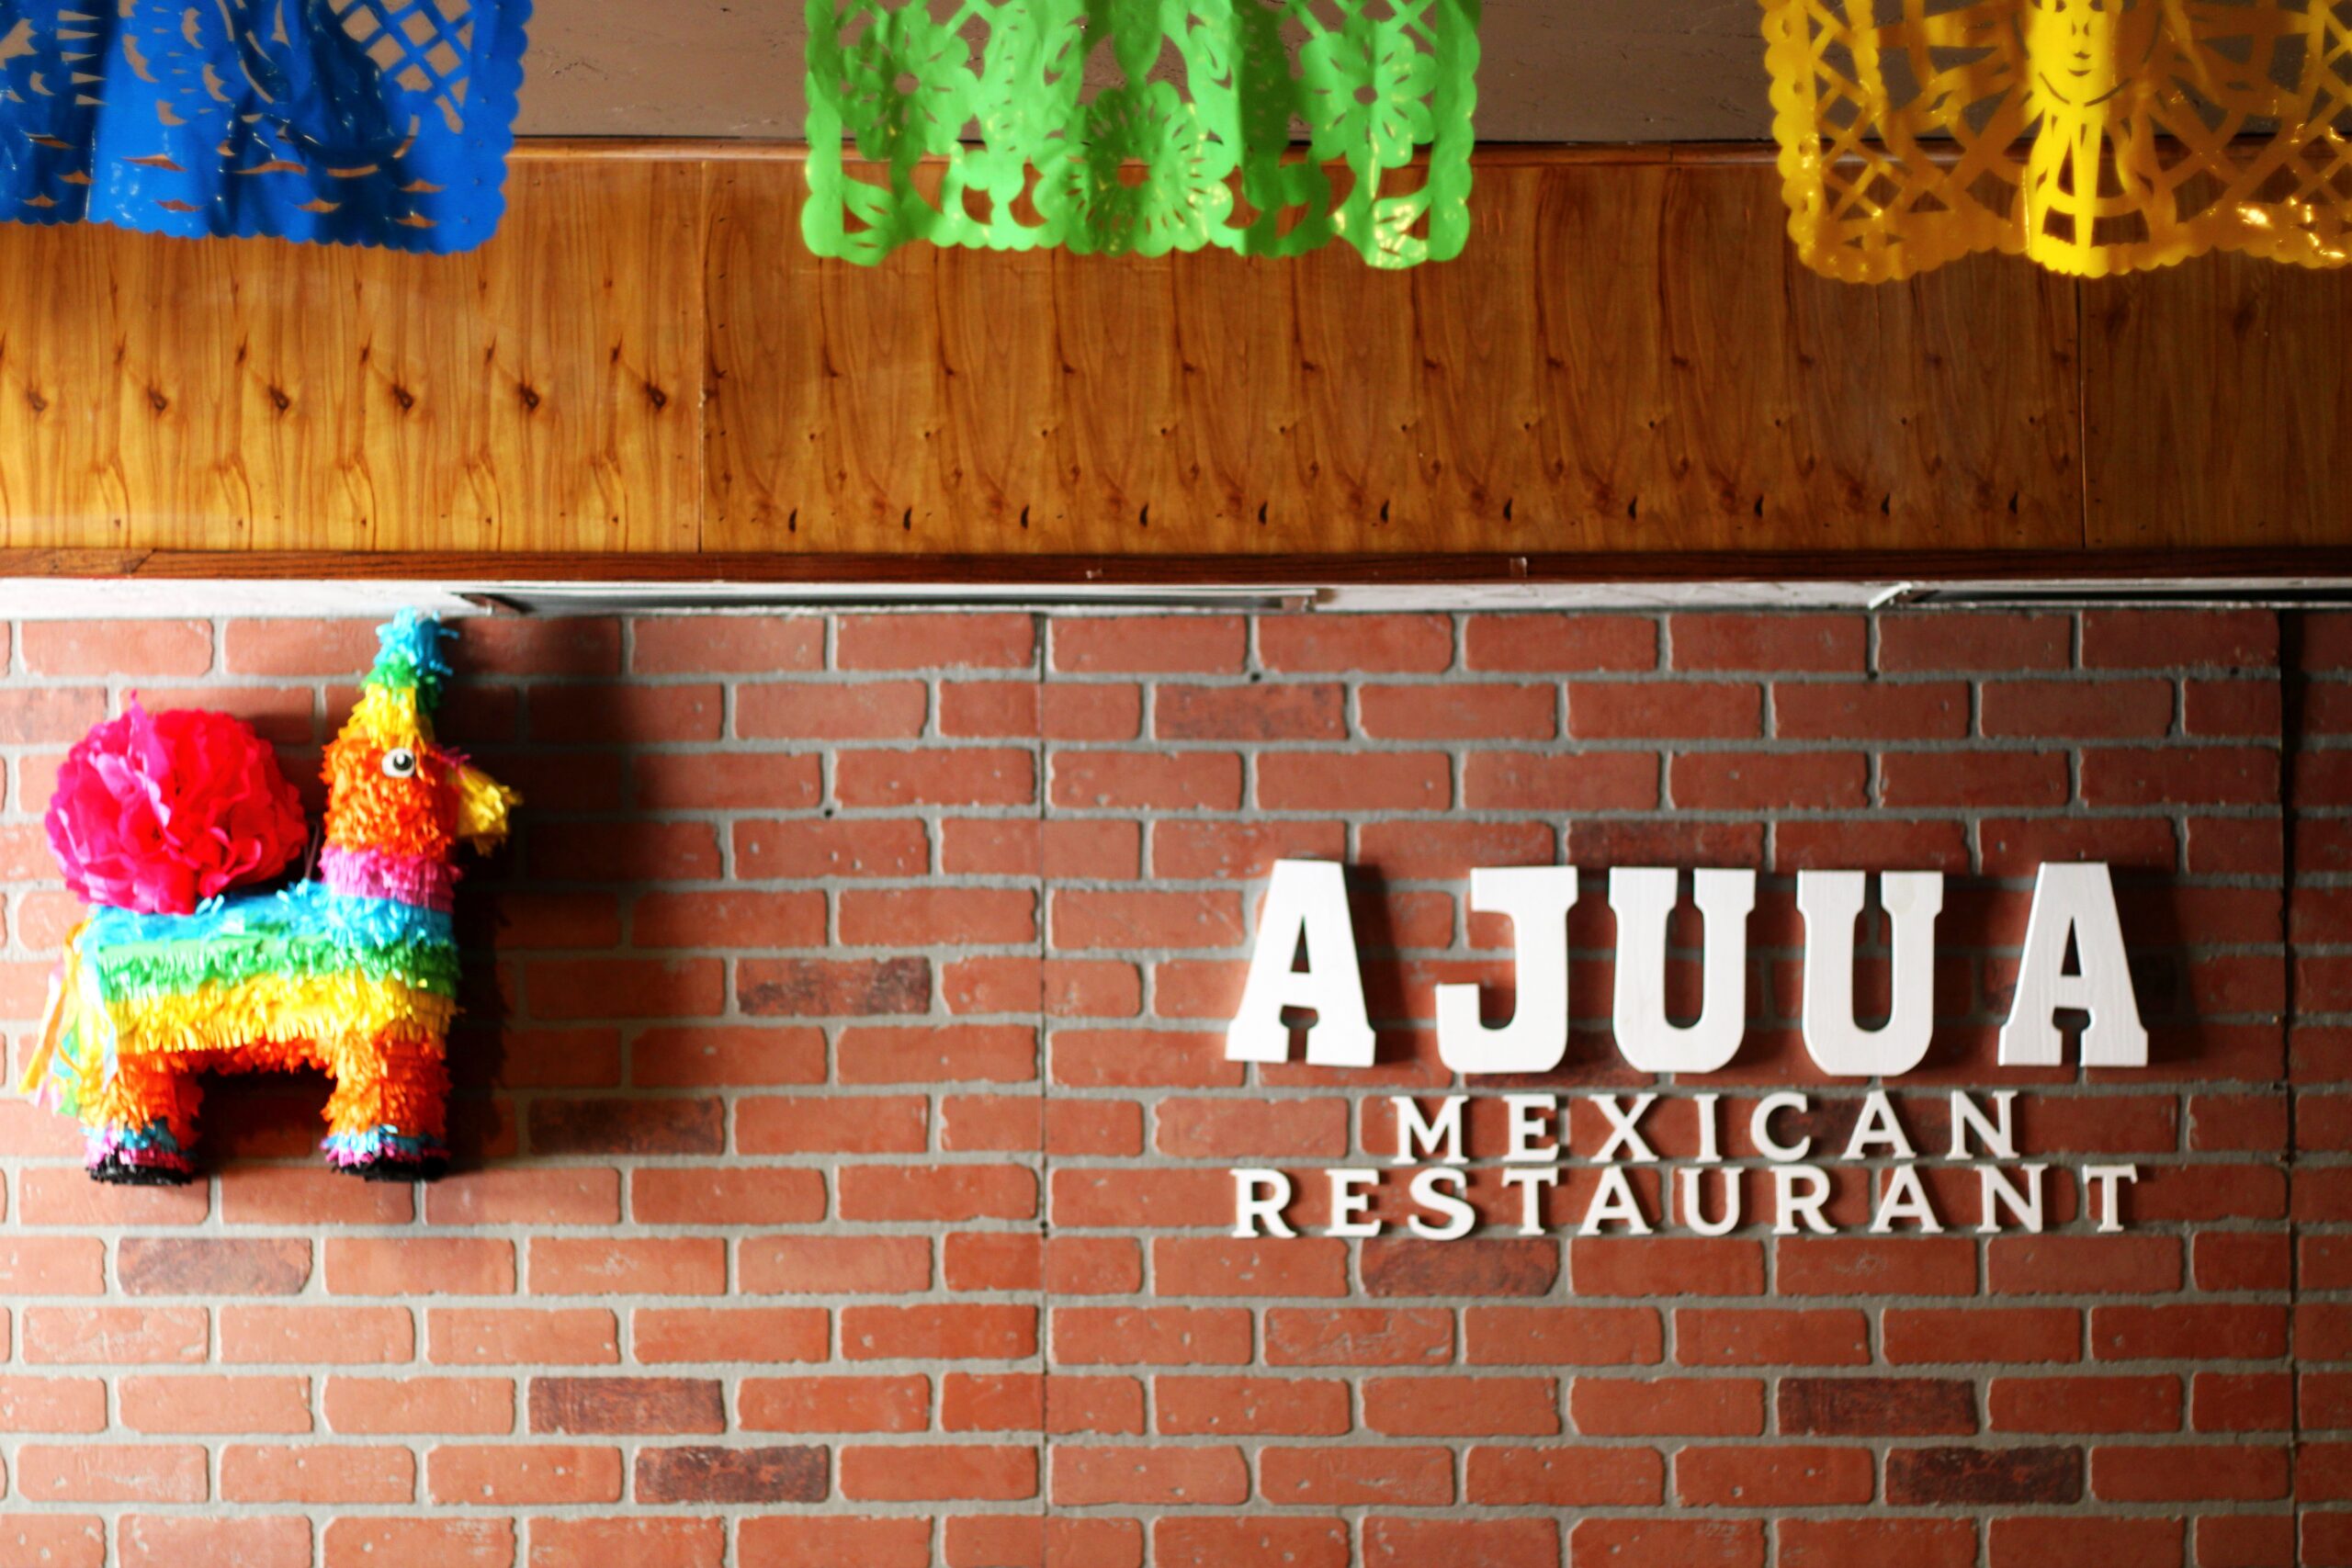 Interior of Ajuua Mexican Restuarant (Photo by Mark Whittaker)